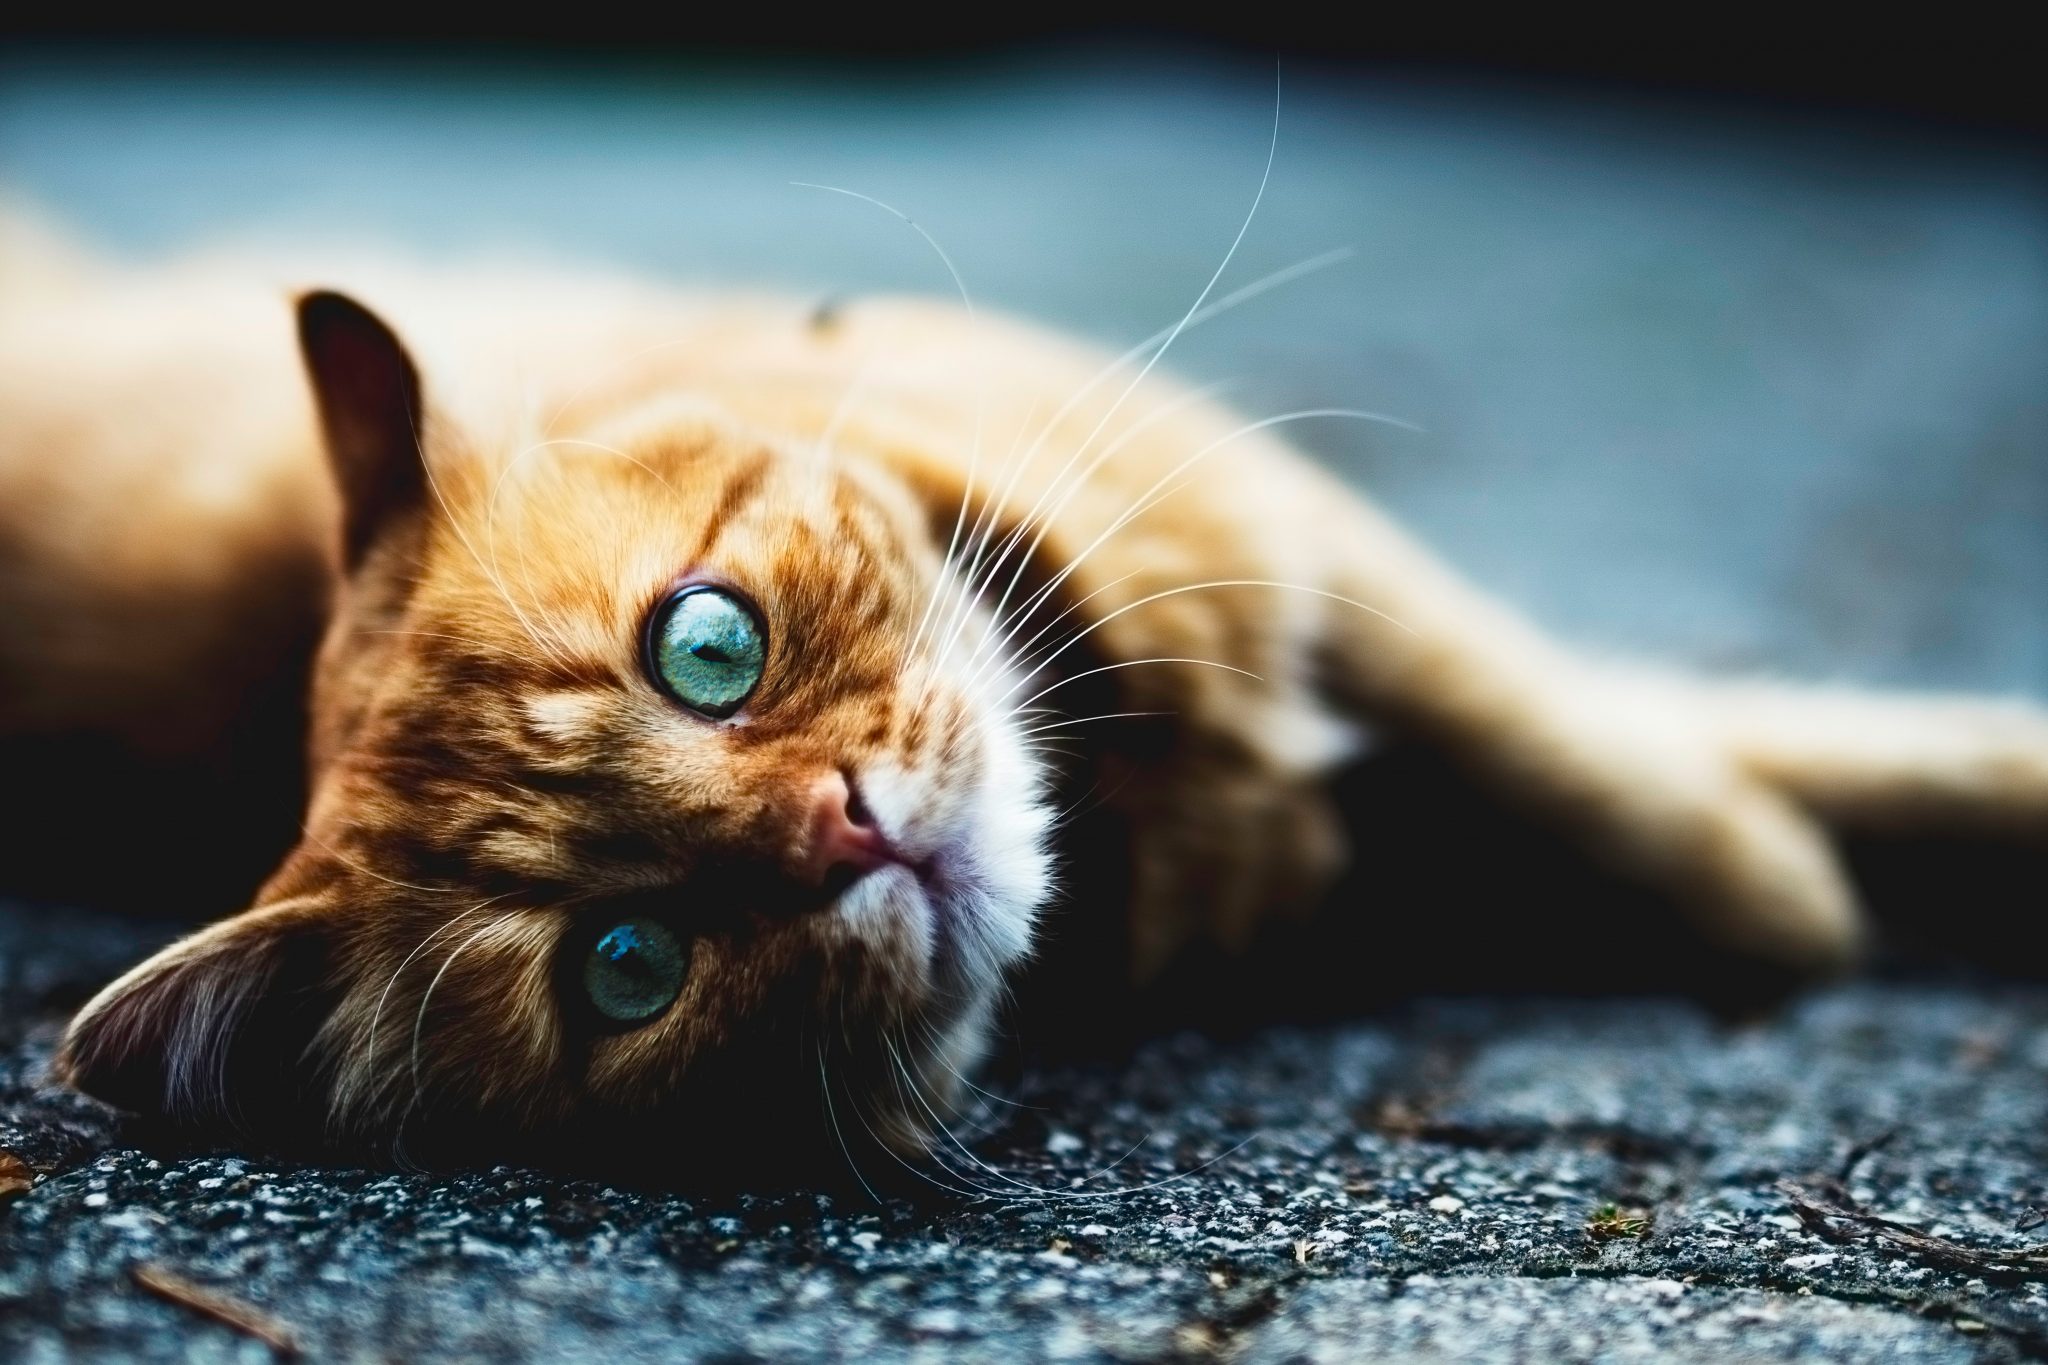 Ginger cat lying on floor – crazy cat facts